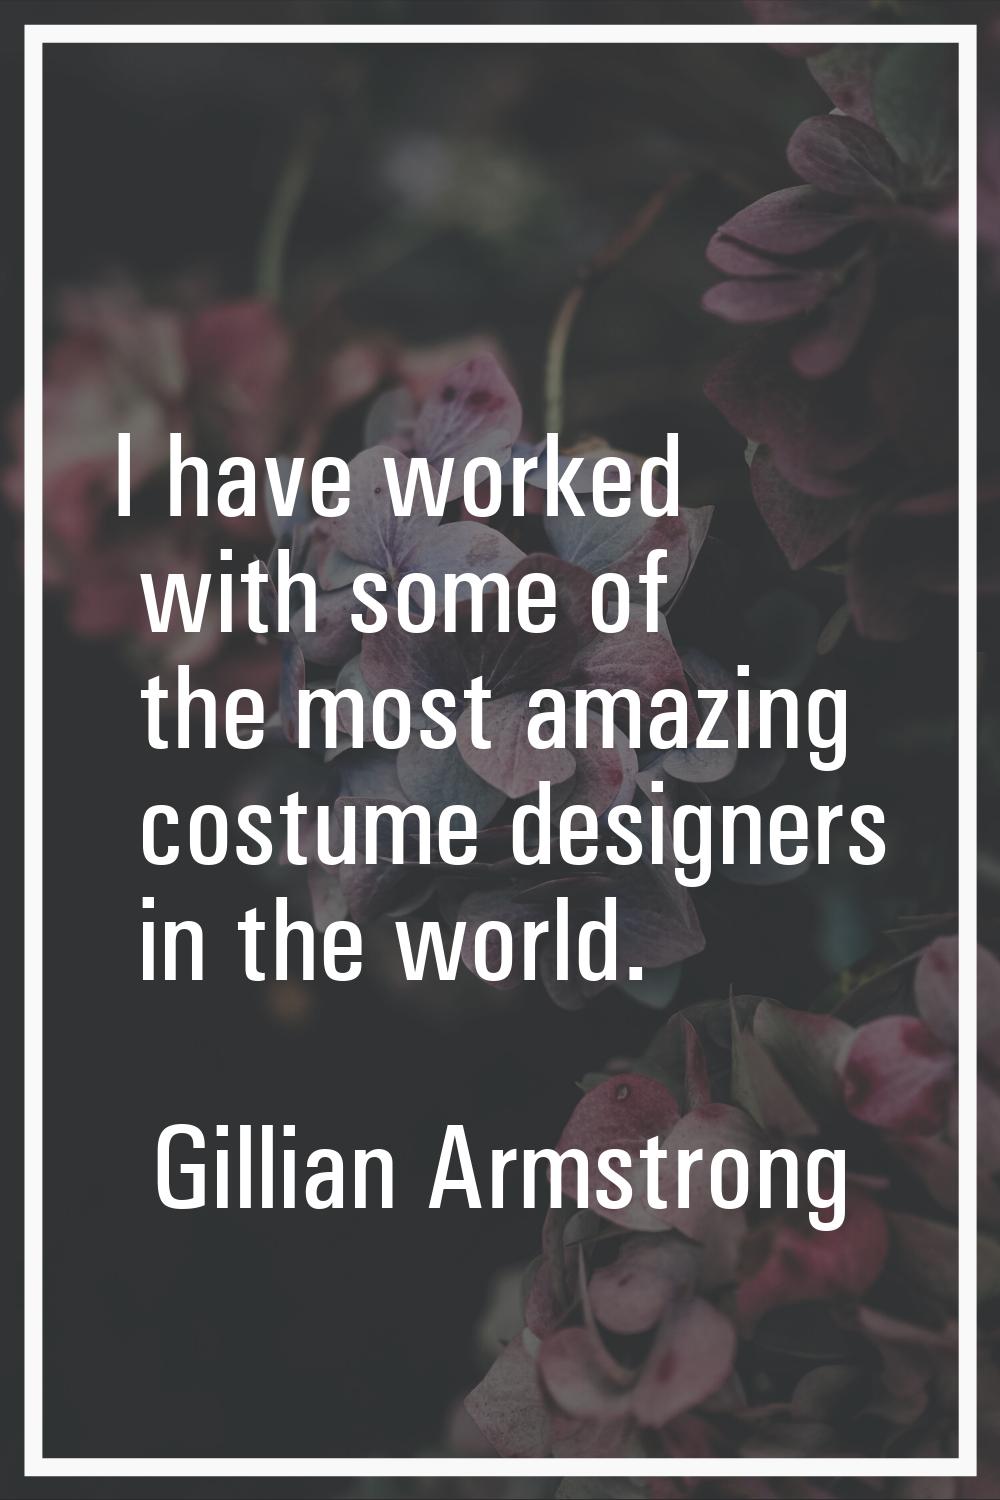 I have worked with some of the most amazing costume designers in the world.